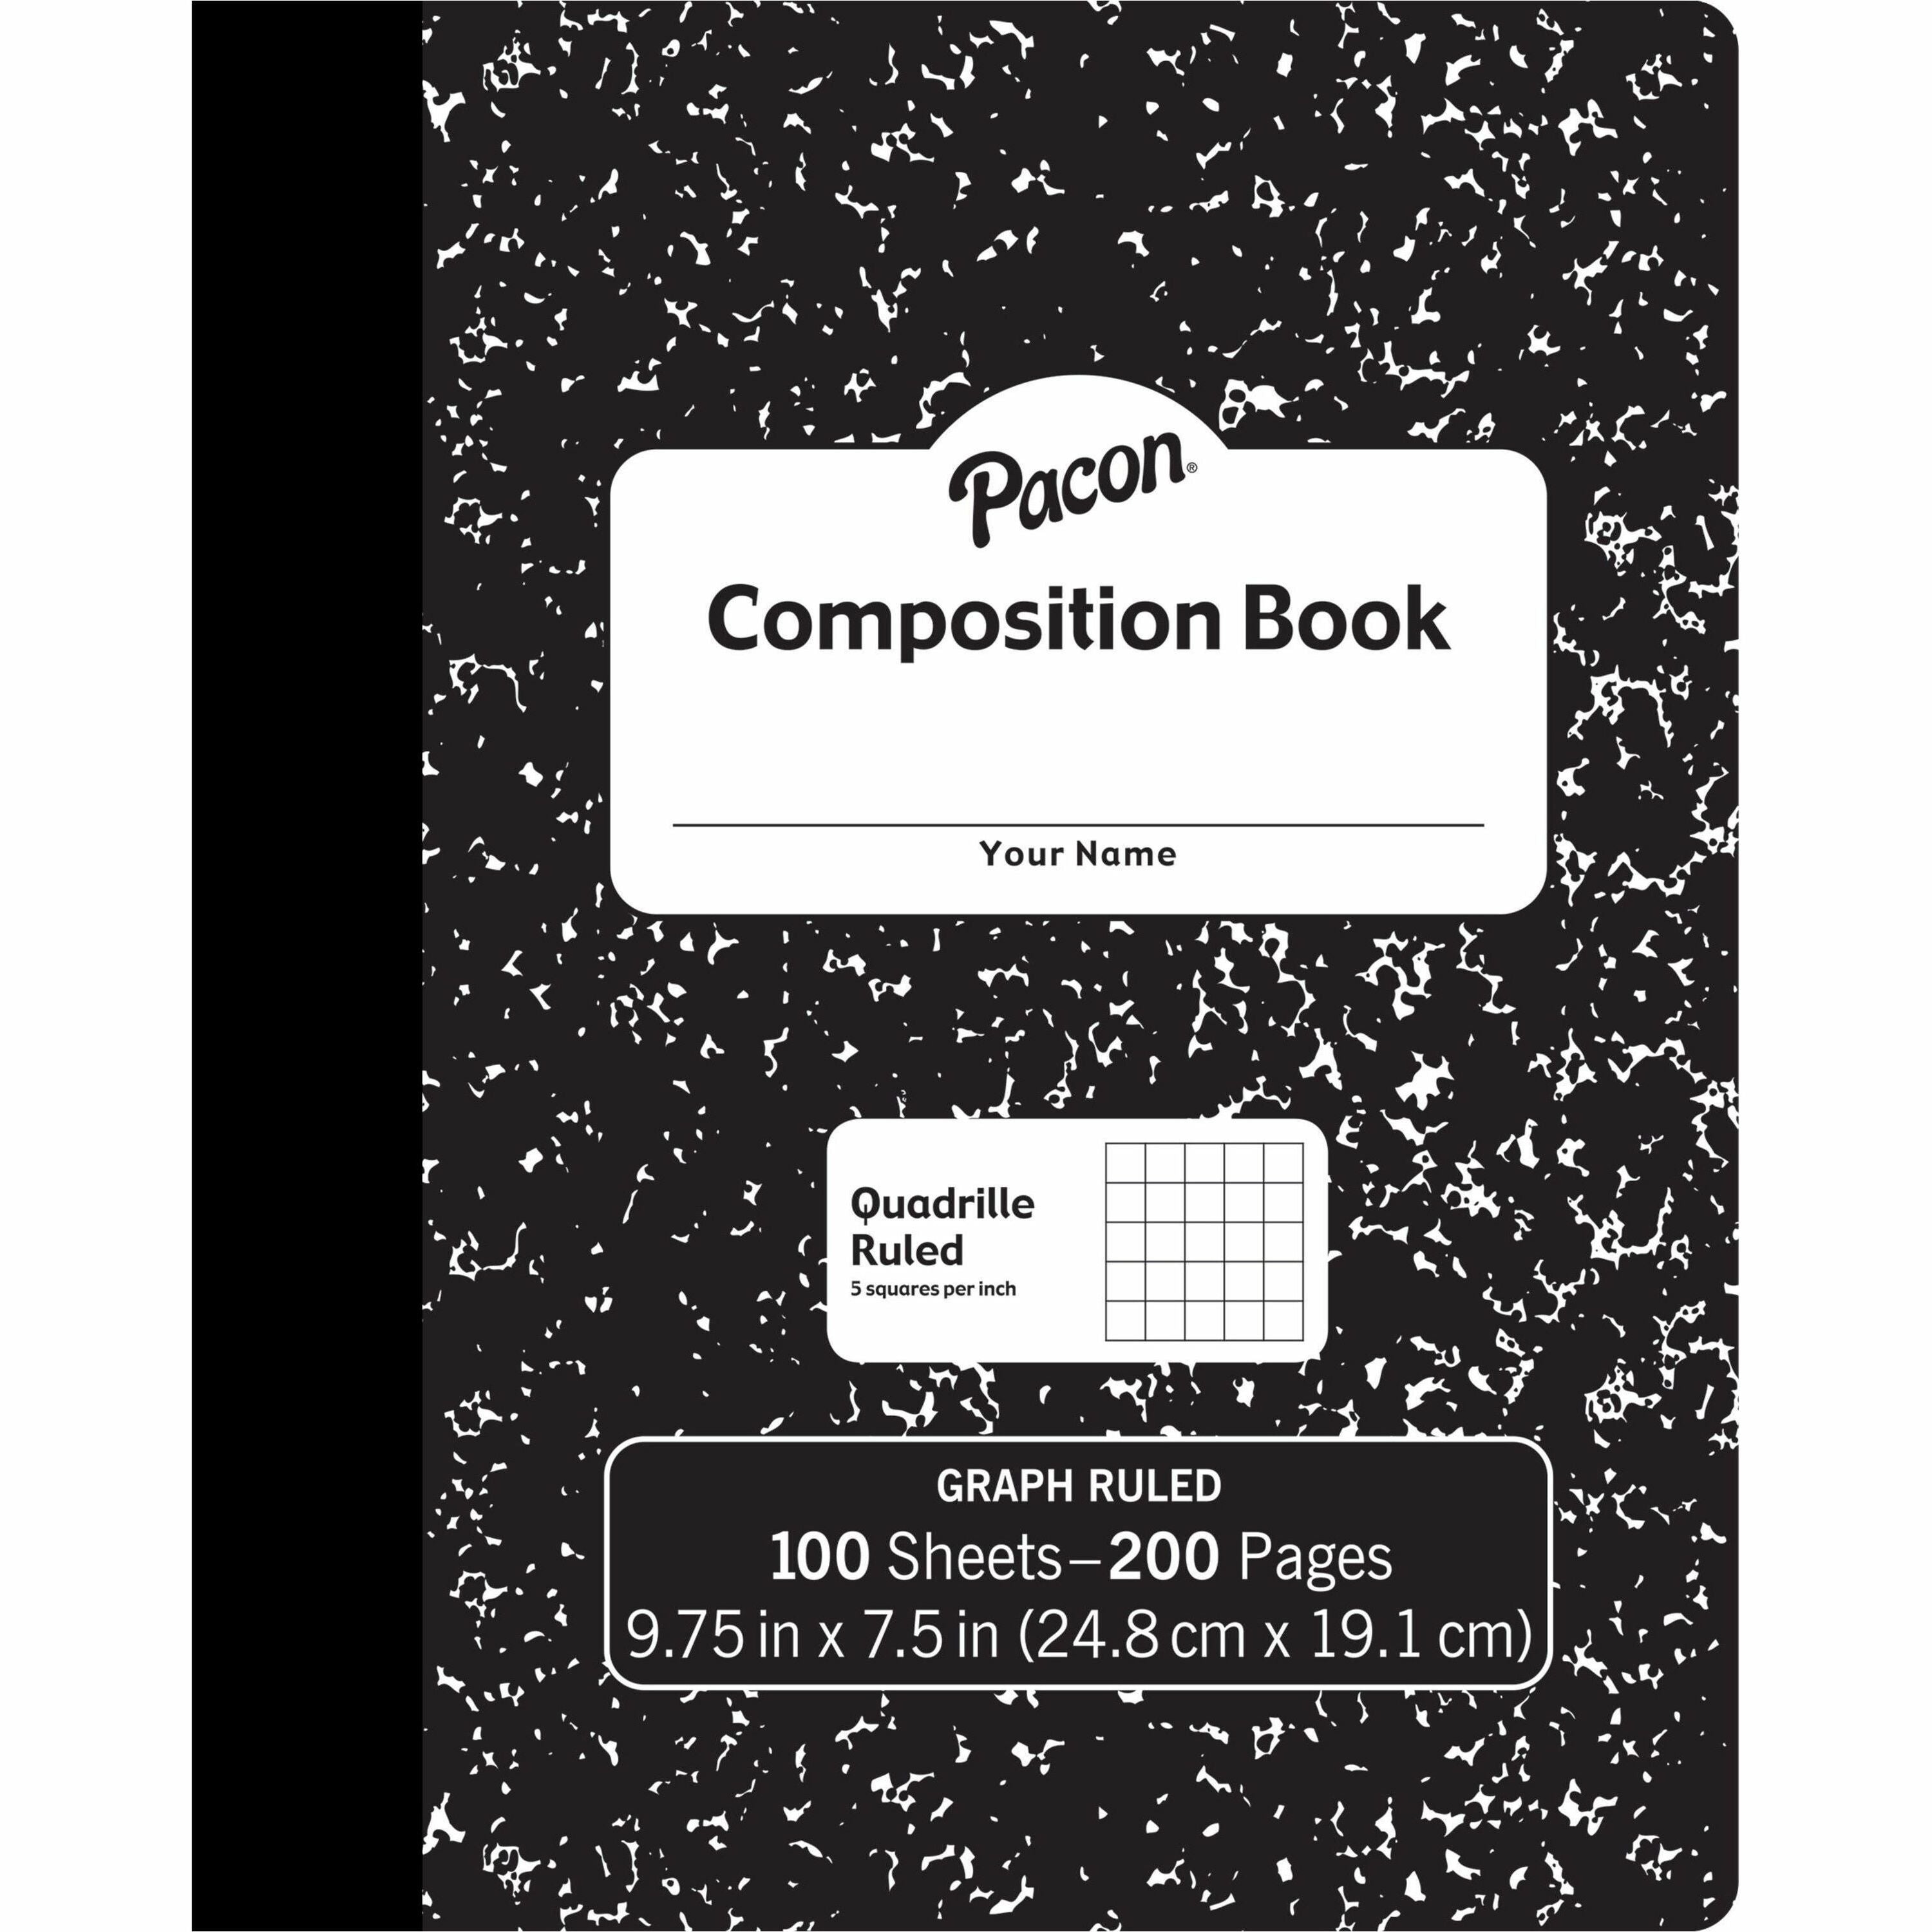 Pacon Composition Book - 100 Sheets - 200 Pages - Quad Ruled - 0.20" Ruled - 9.75" x 7.5" x 0.1" - White Paper - Black Marble Cover - Durable, Hard Cover - 1 Each - 